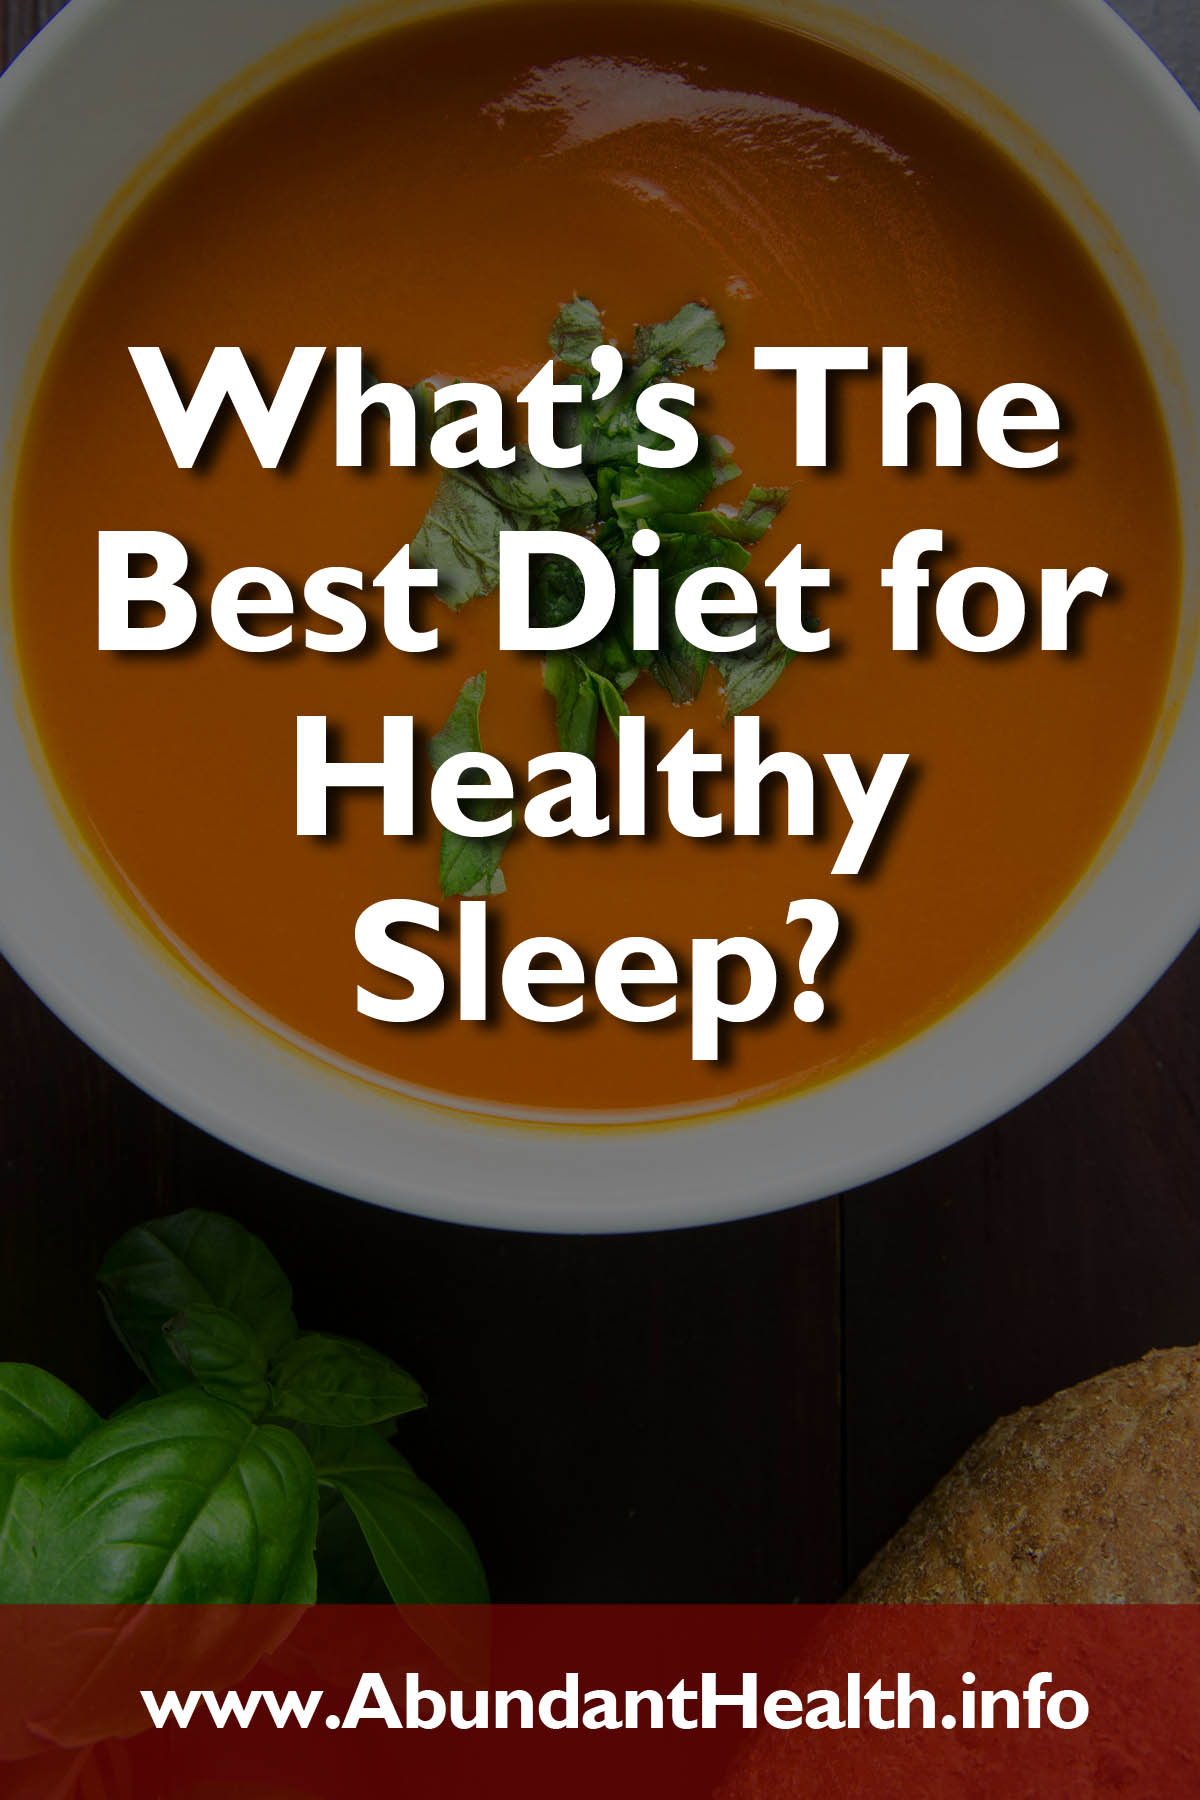 What’s The Best Diet for Healthy Sleep?